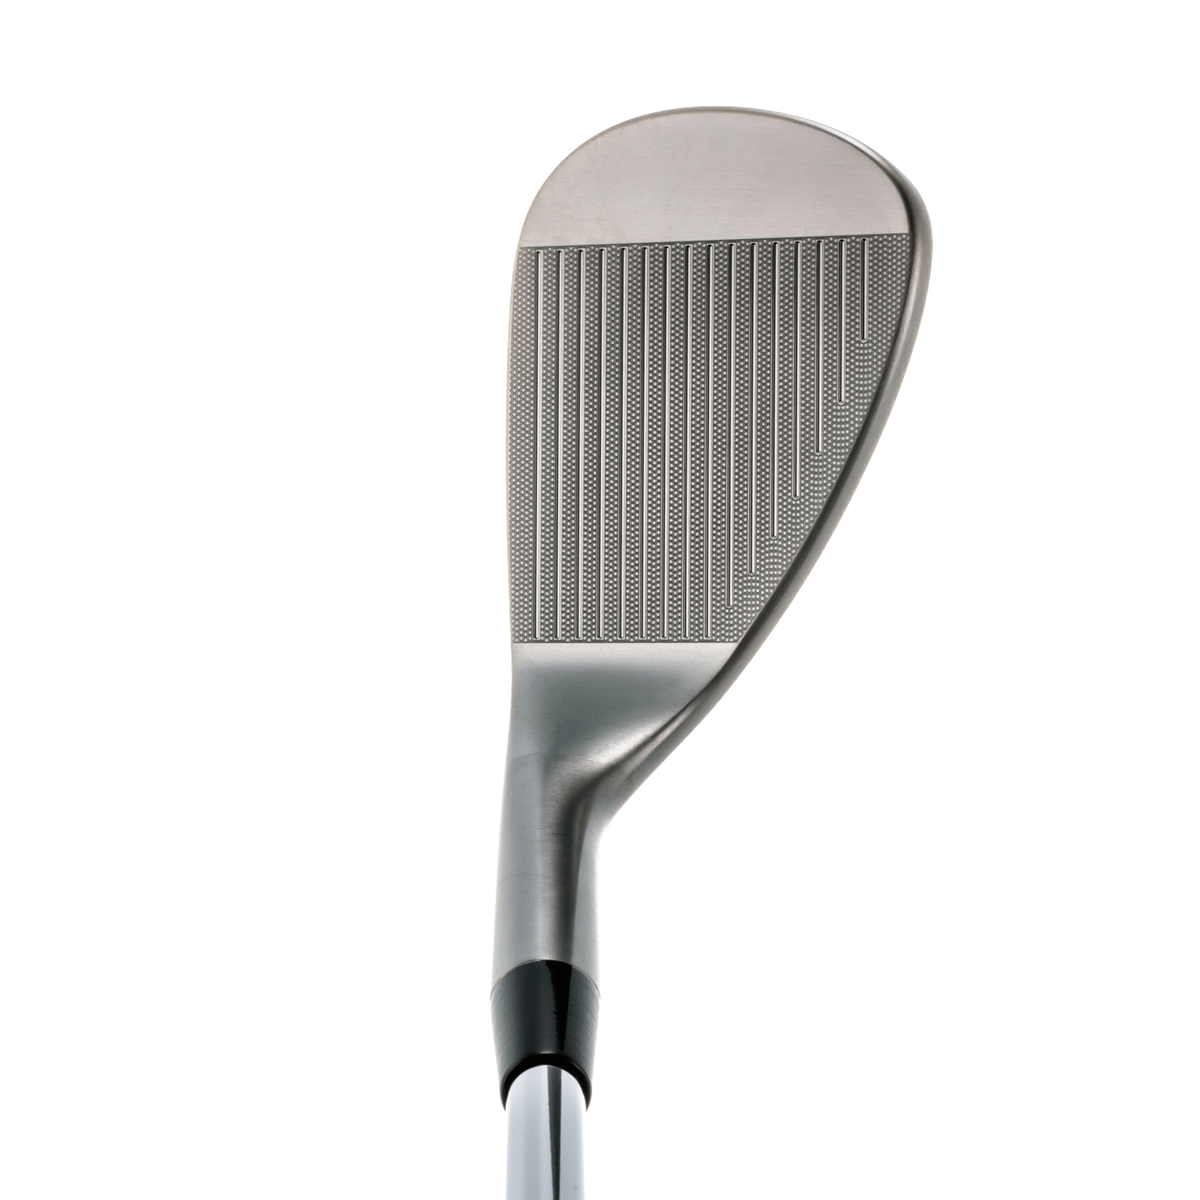 PROTOCONCEPT Golf, Forged Wedge - 31